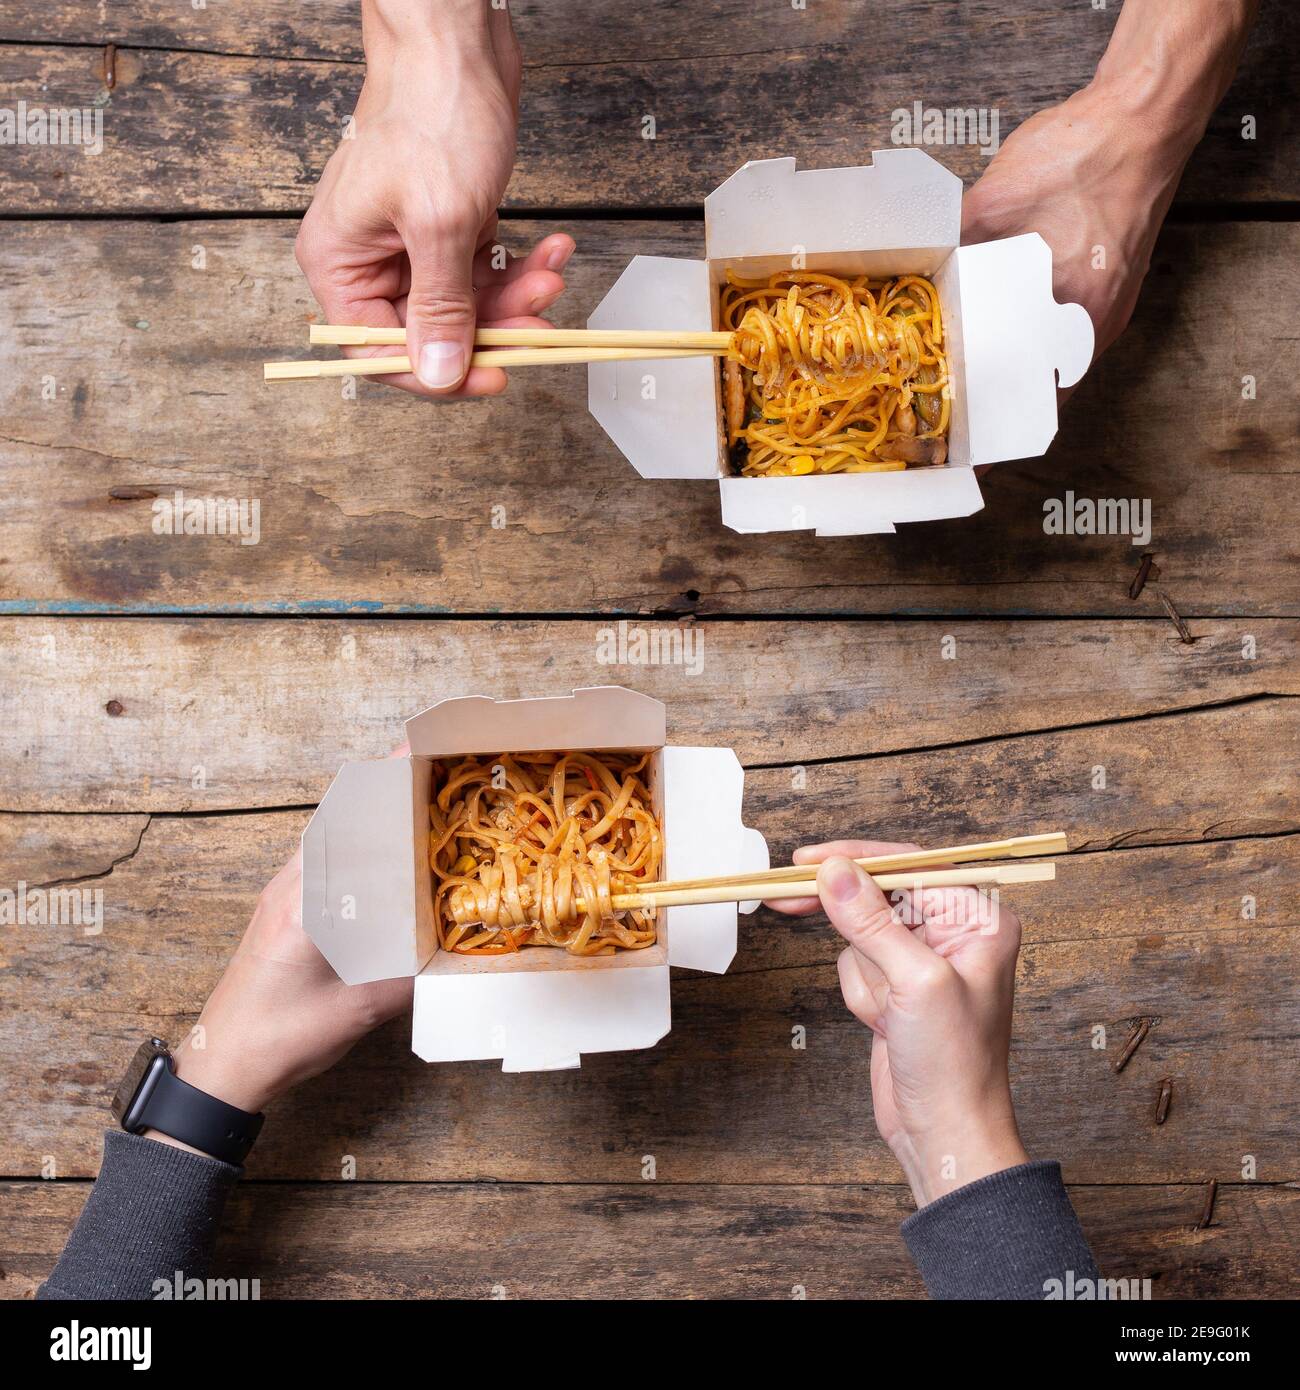 Top view of couple eating chinese food from boxes Stock Photo